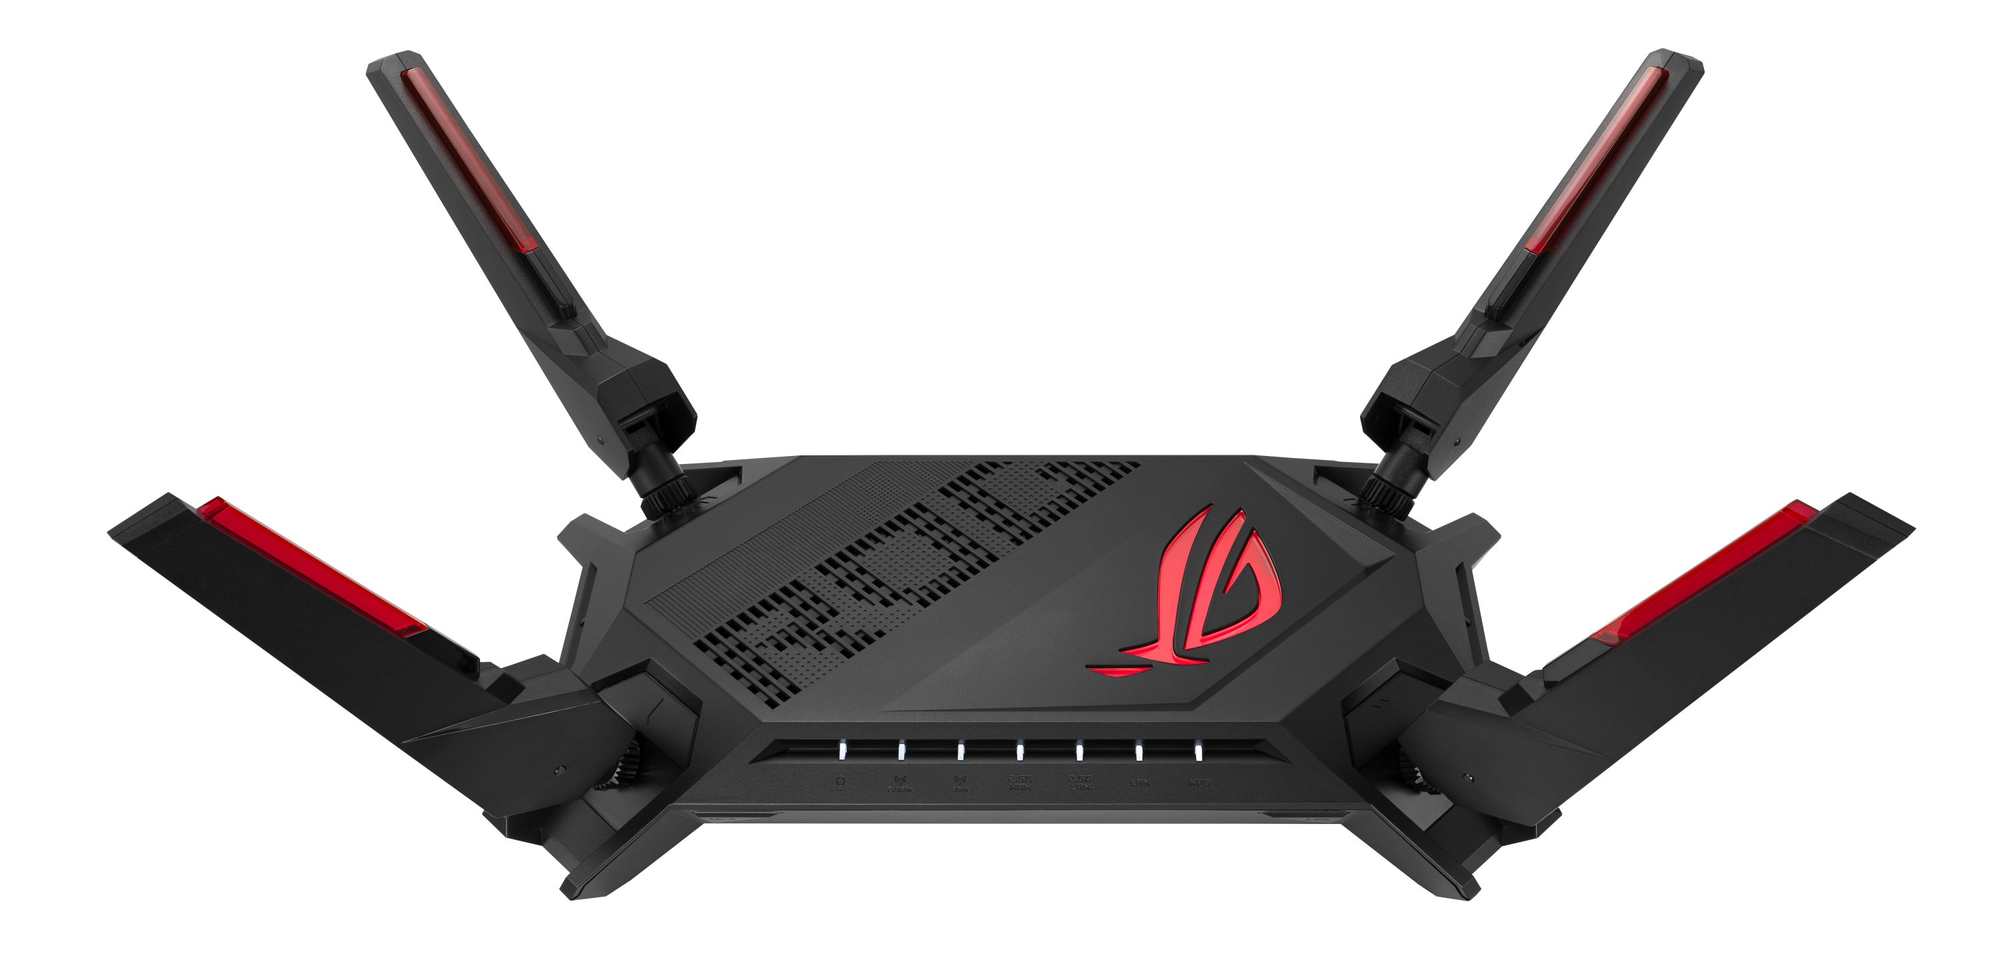 ASUS ROG Rapture GT-AX6000 Dual-Band Gaming Router 1